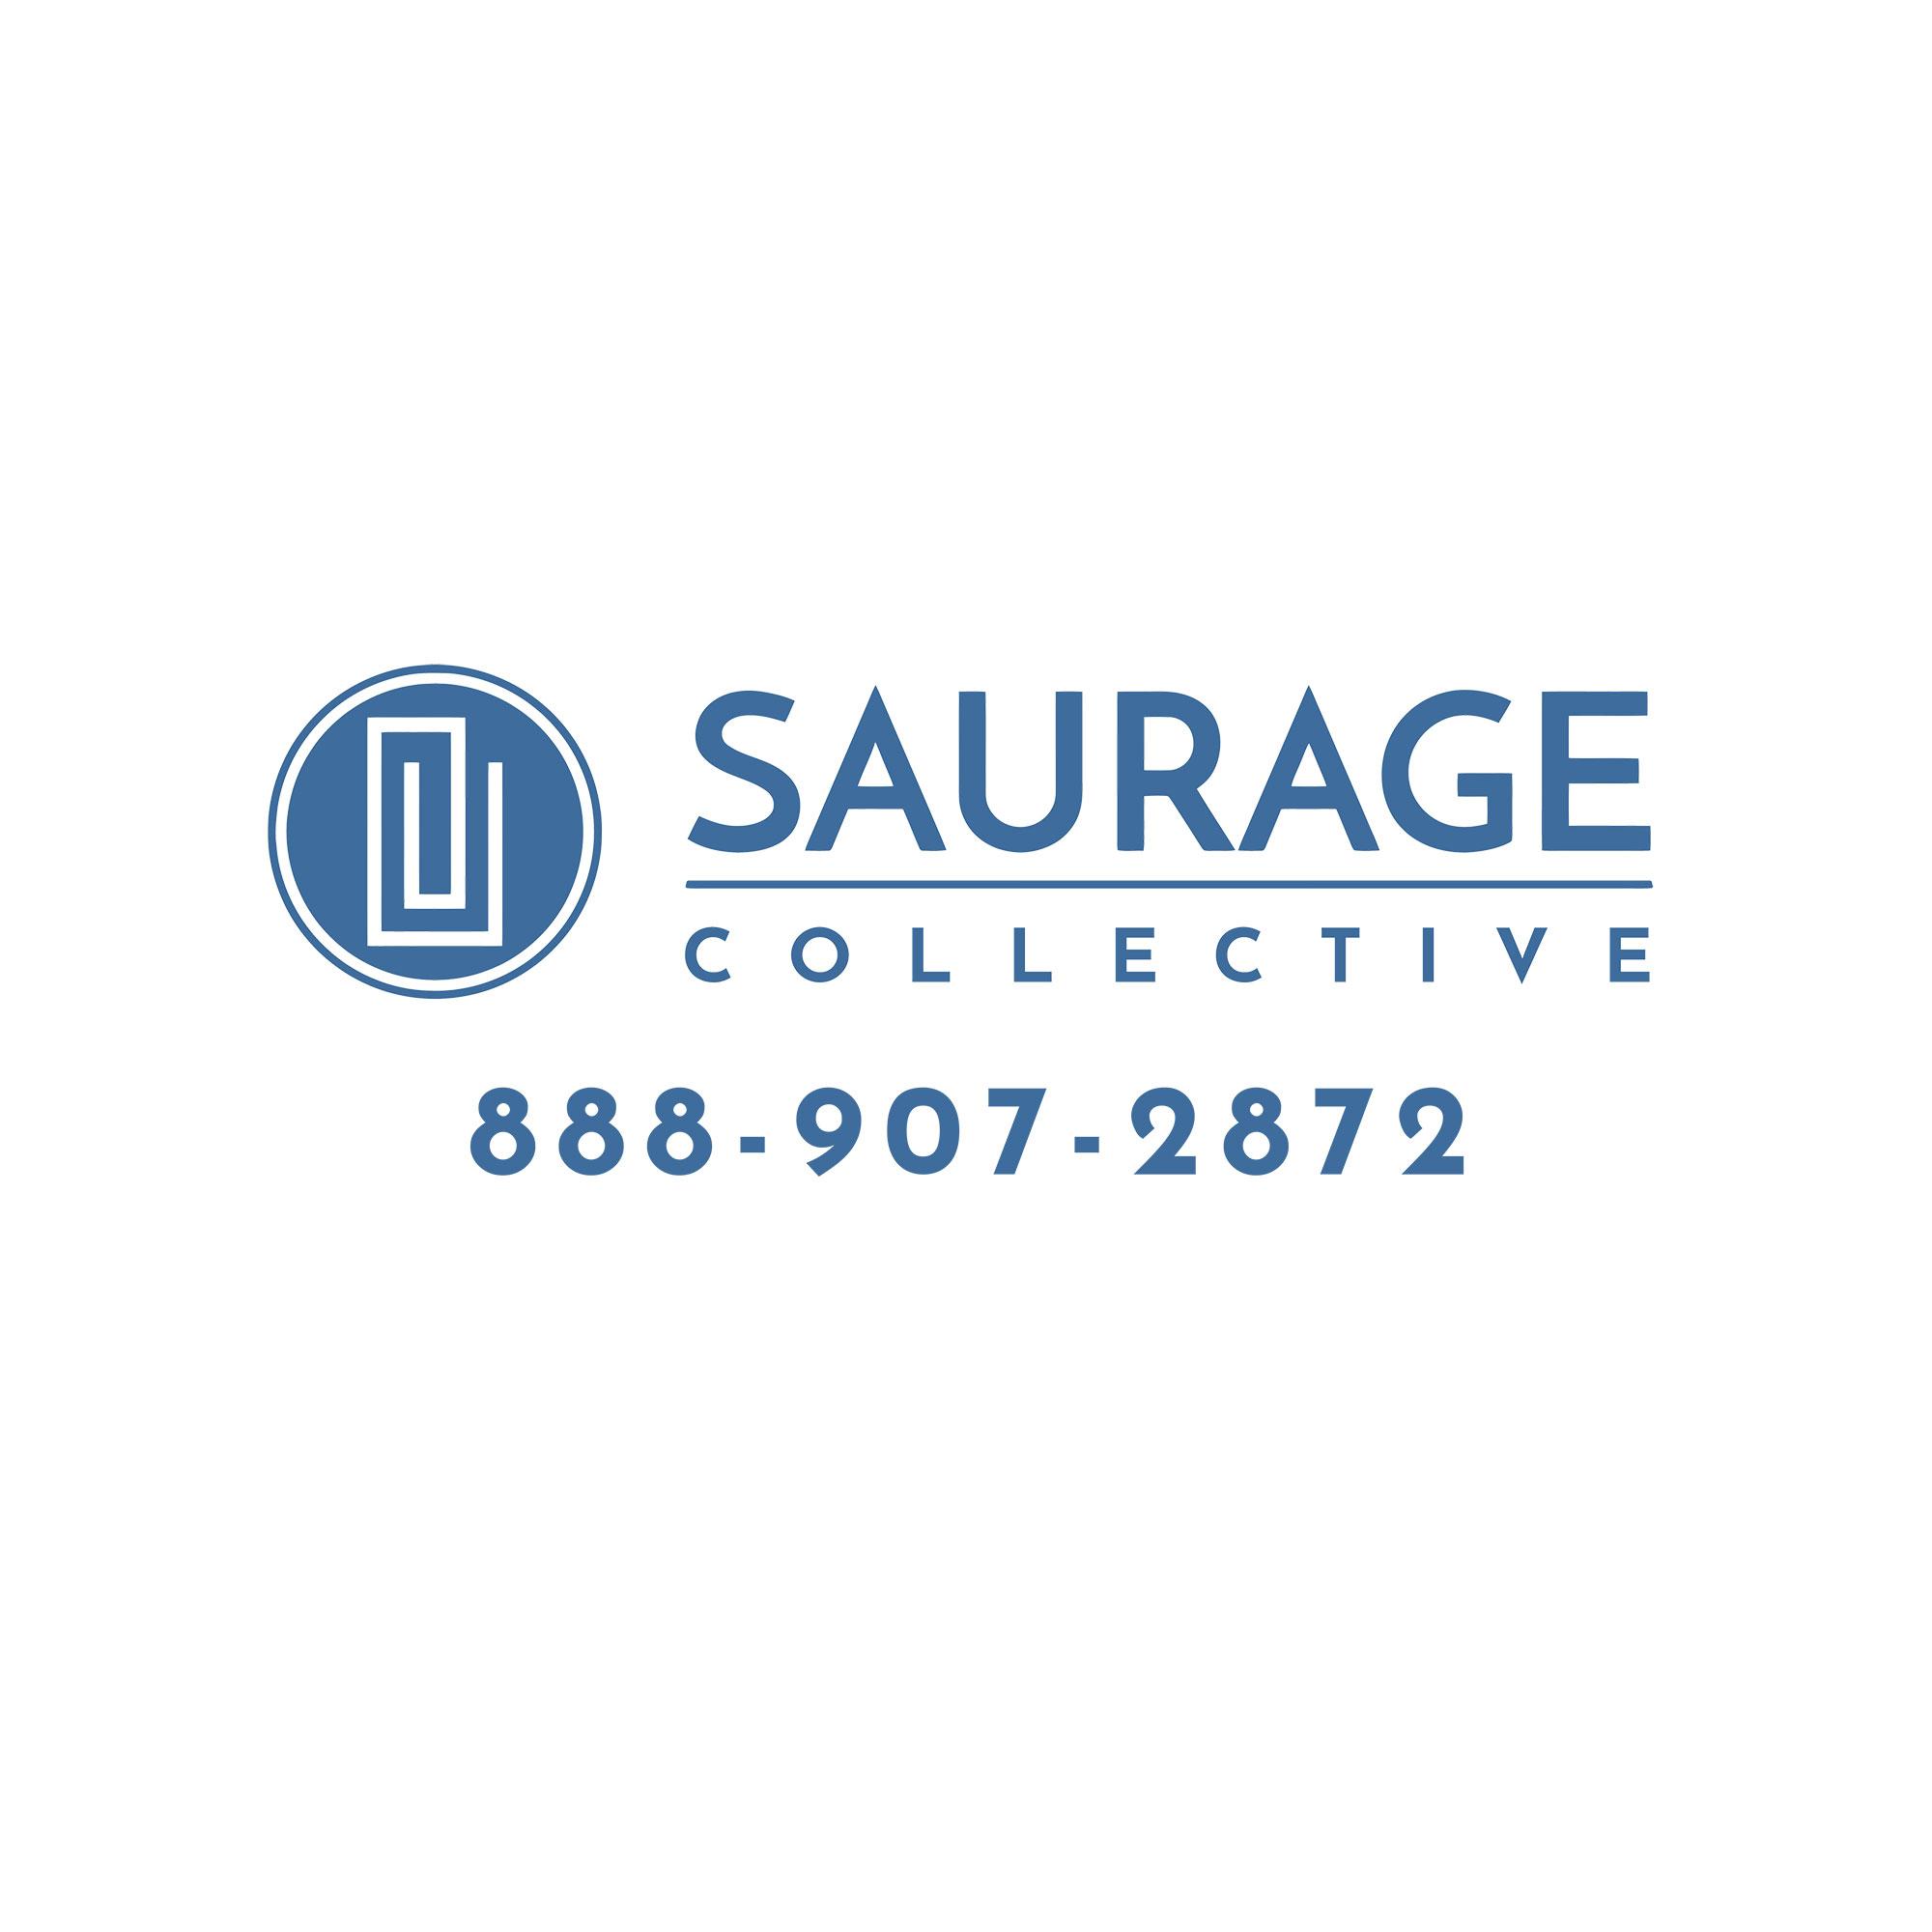 Avatar - Saurage Collective Credentialing Specialists